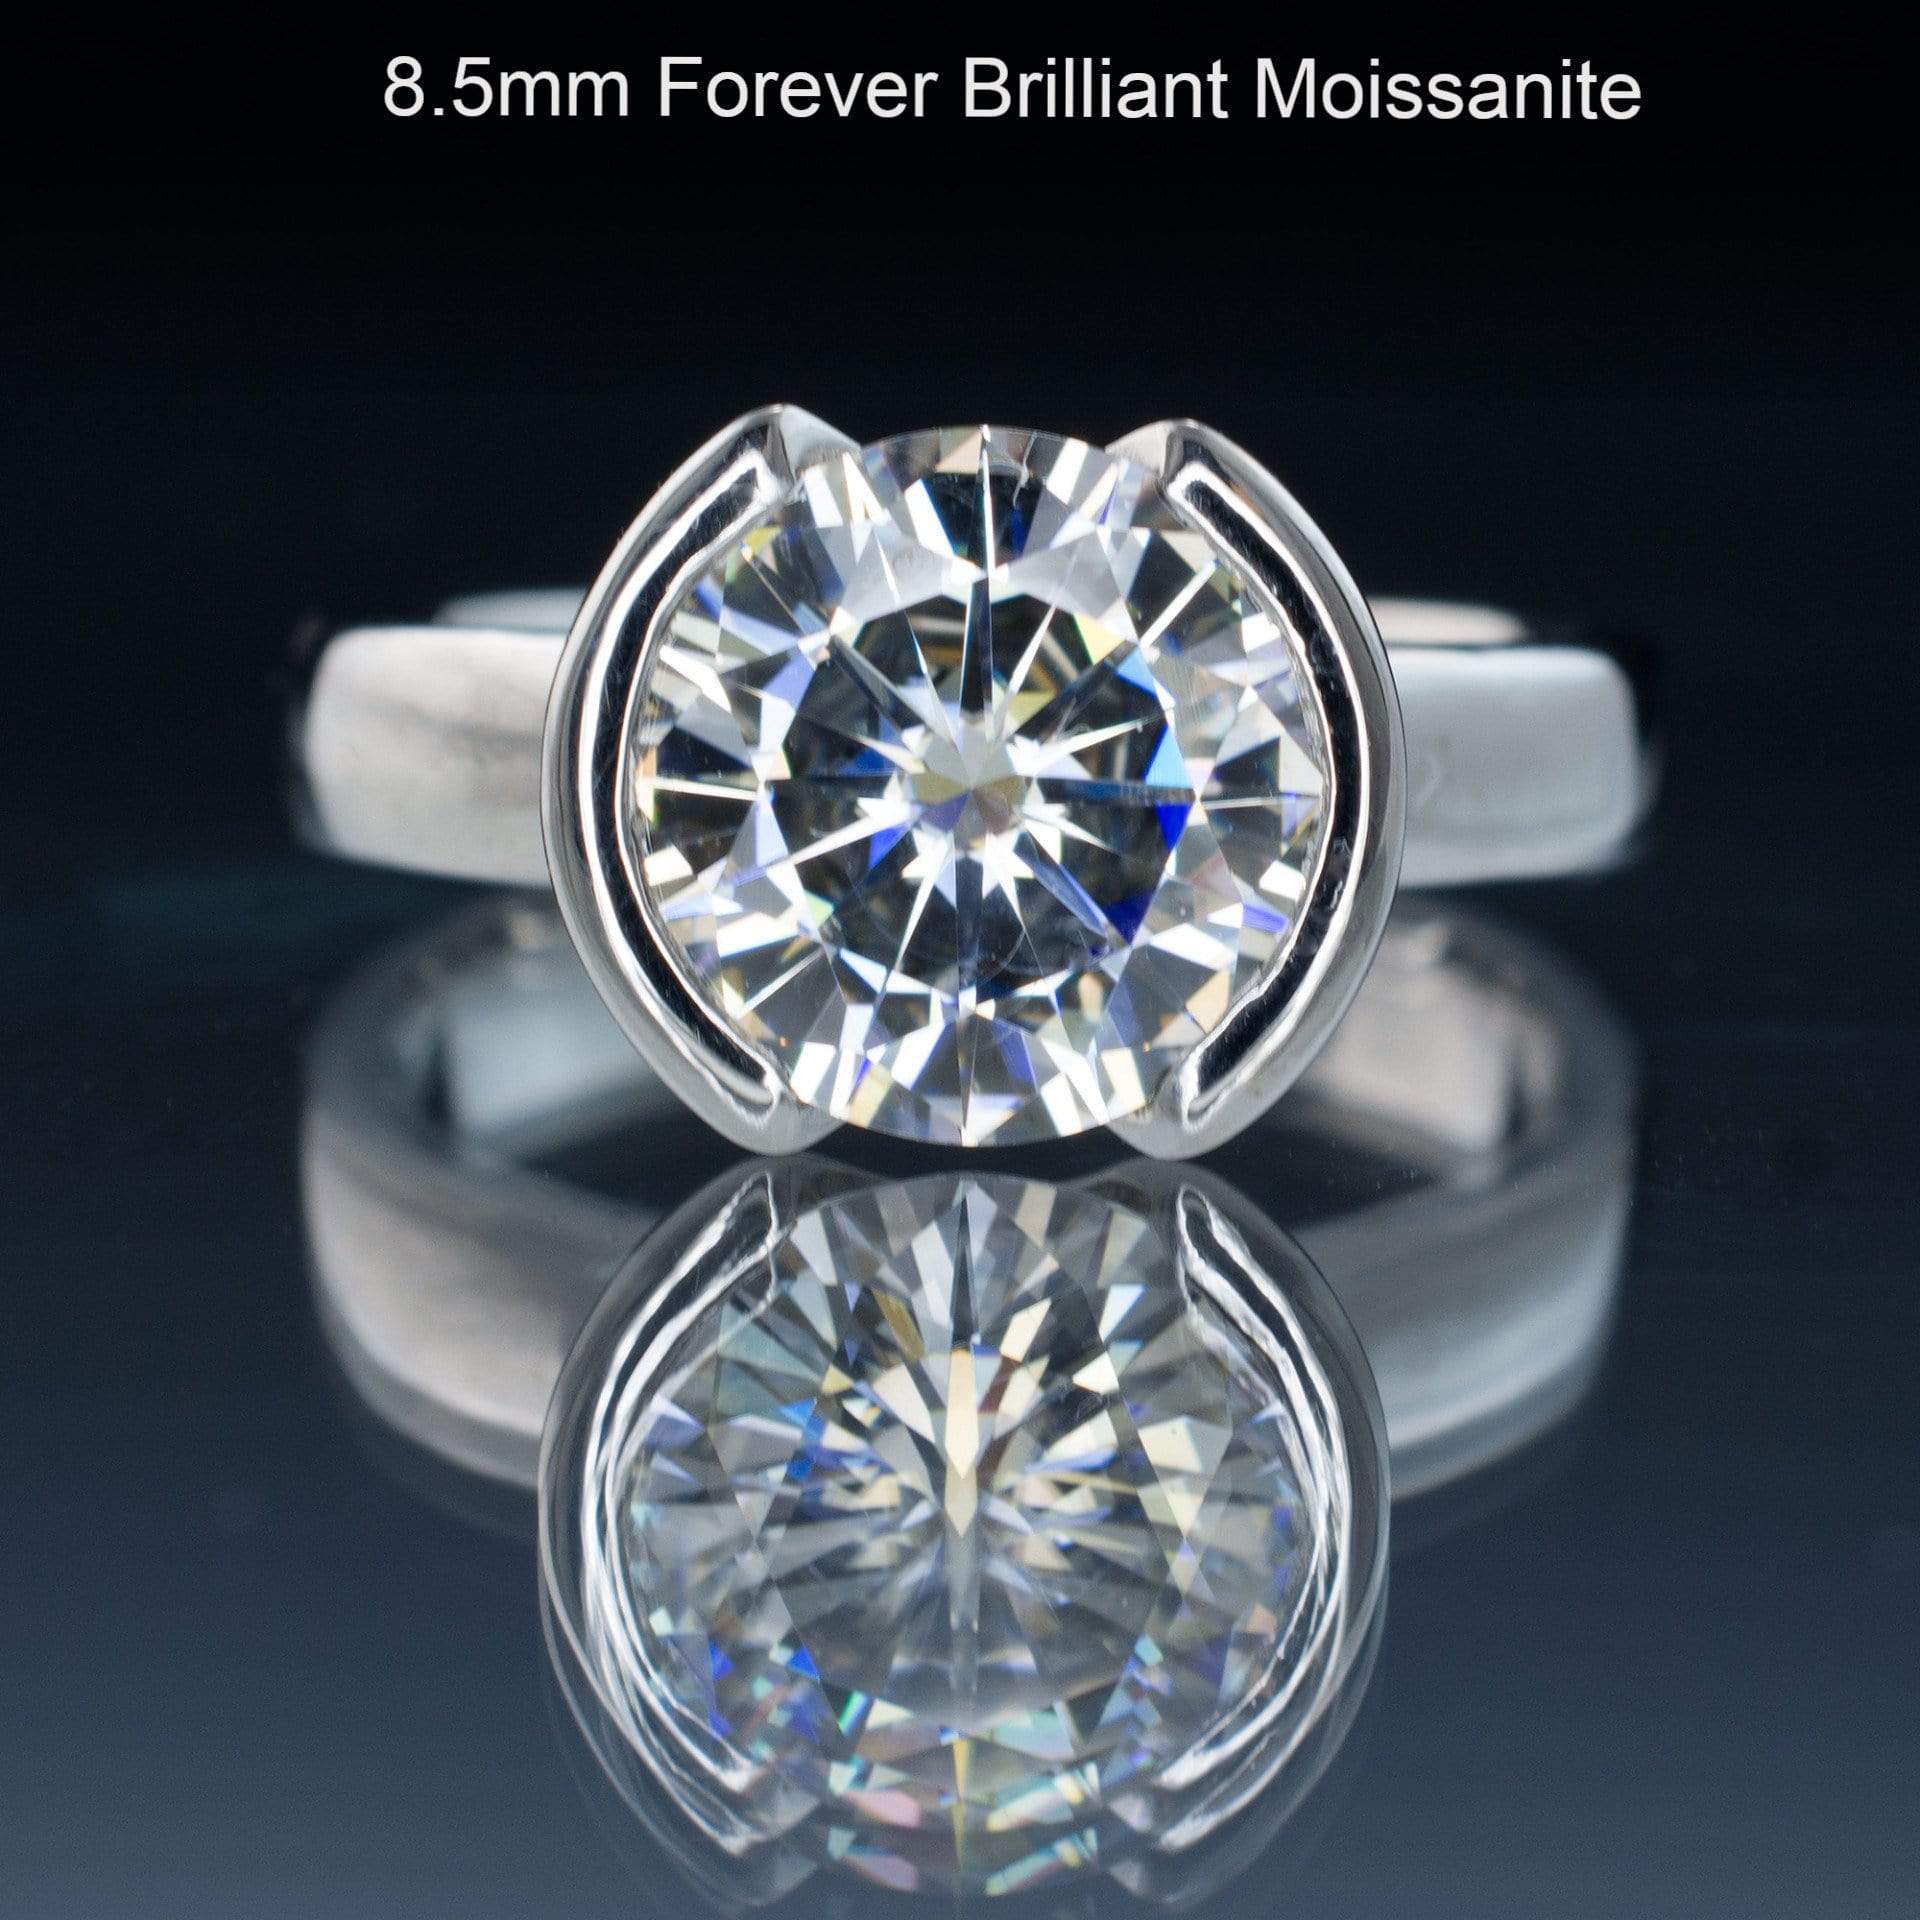 Brilliant Cut Round Moissanite Half Bezel Solitaire Engagement Ring 8.5mm Near-Colorless F1 Moissanite (GHI Color) / 14kPD White Gold Ring by Nodeform